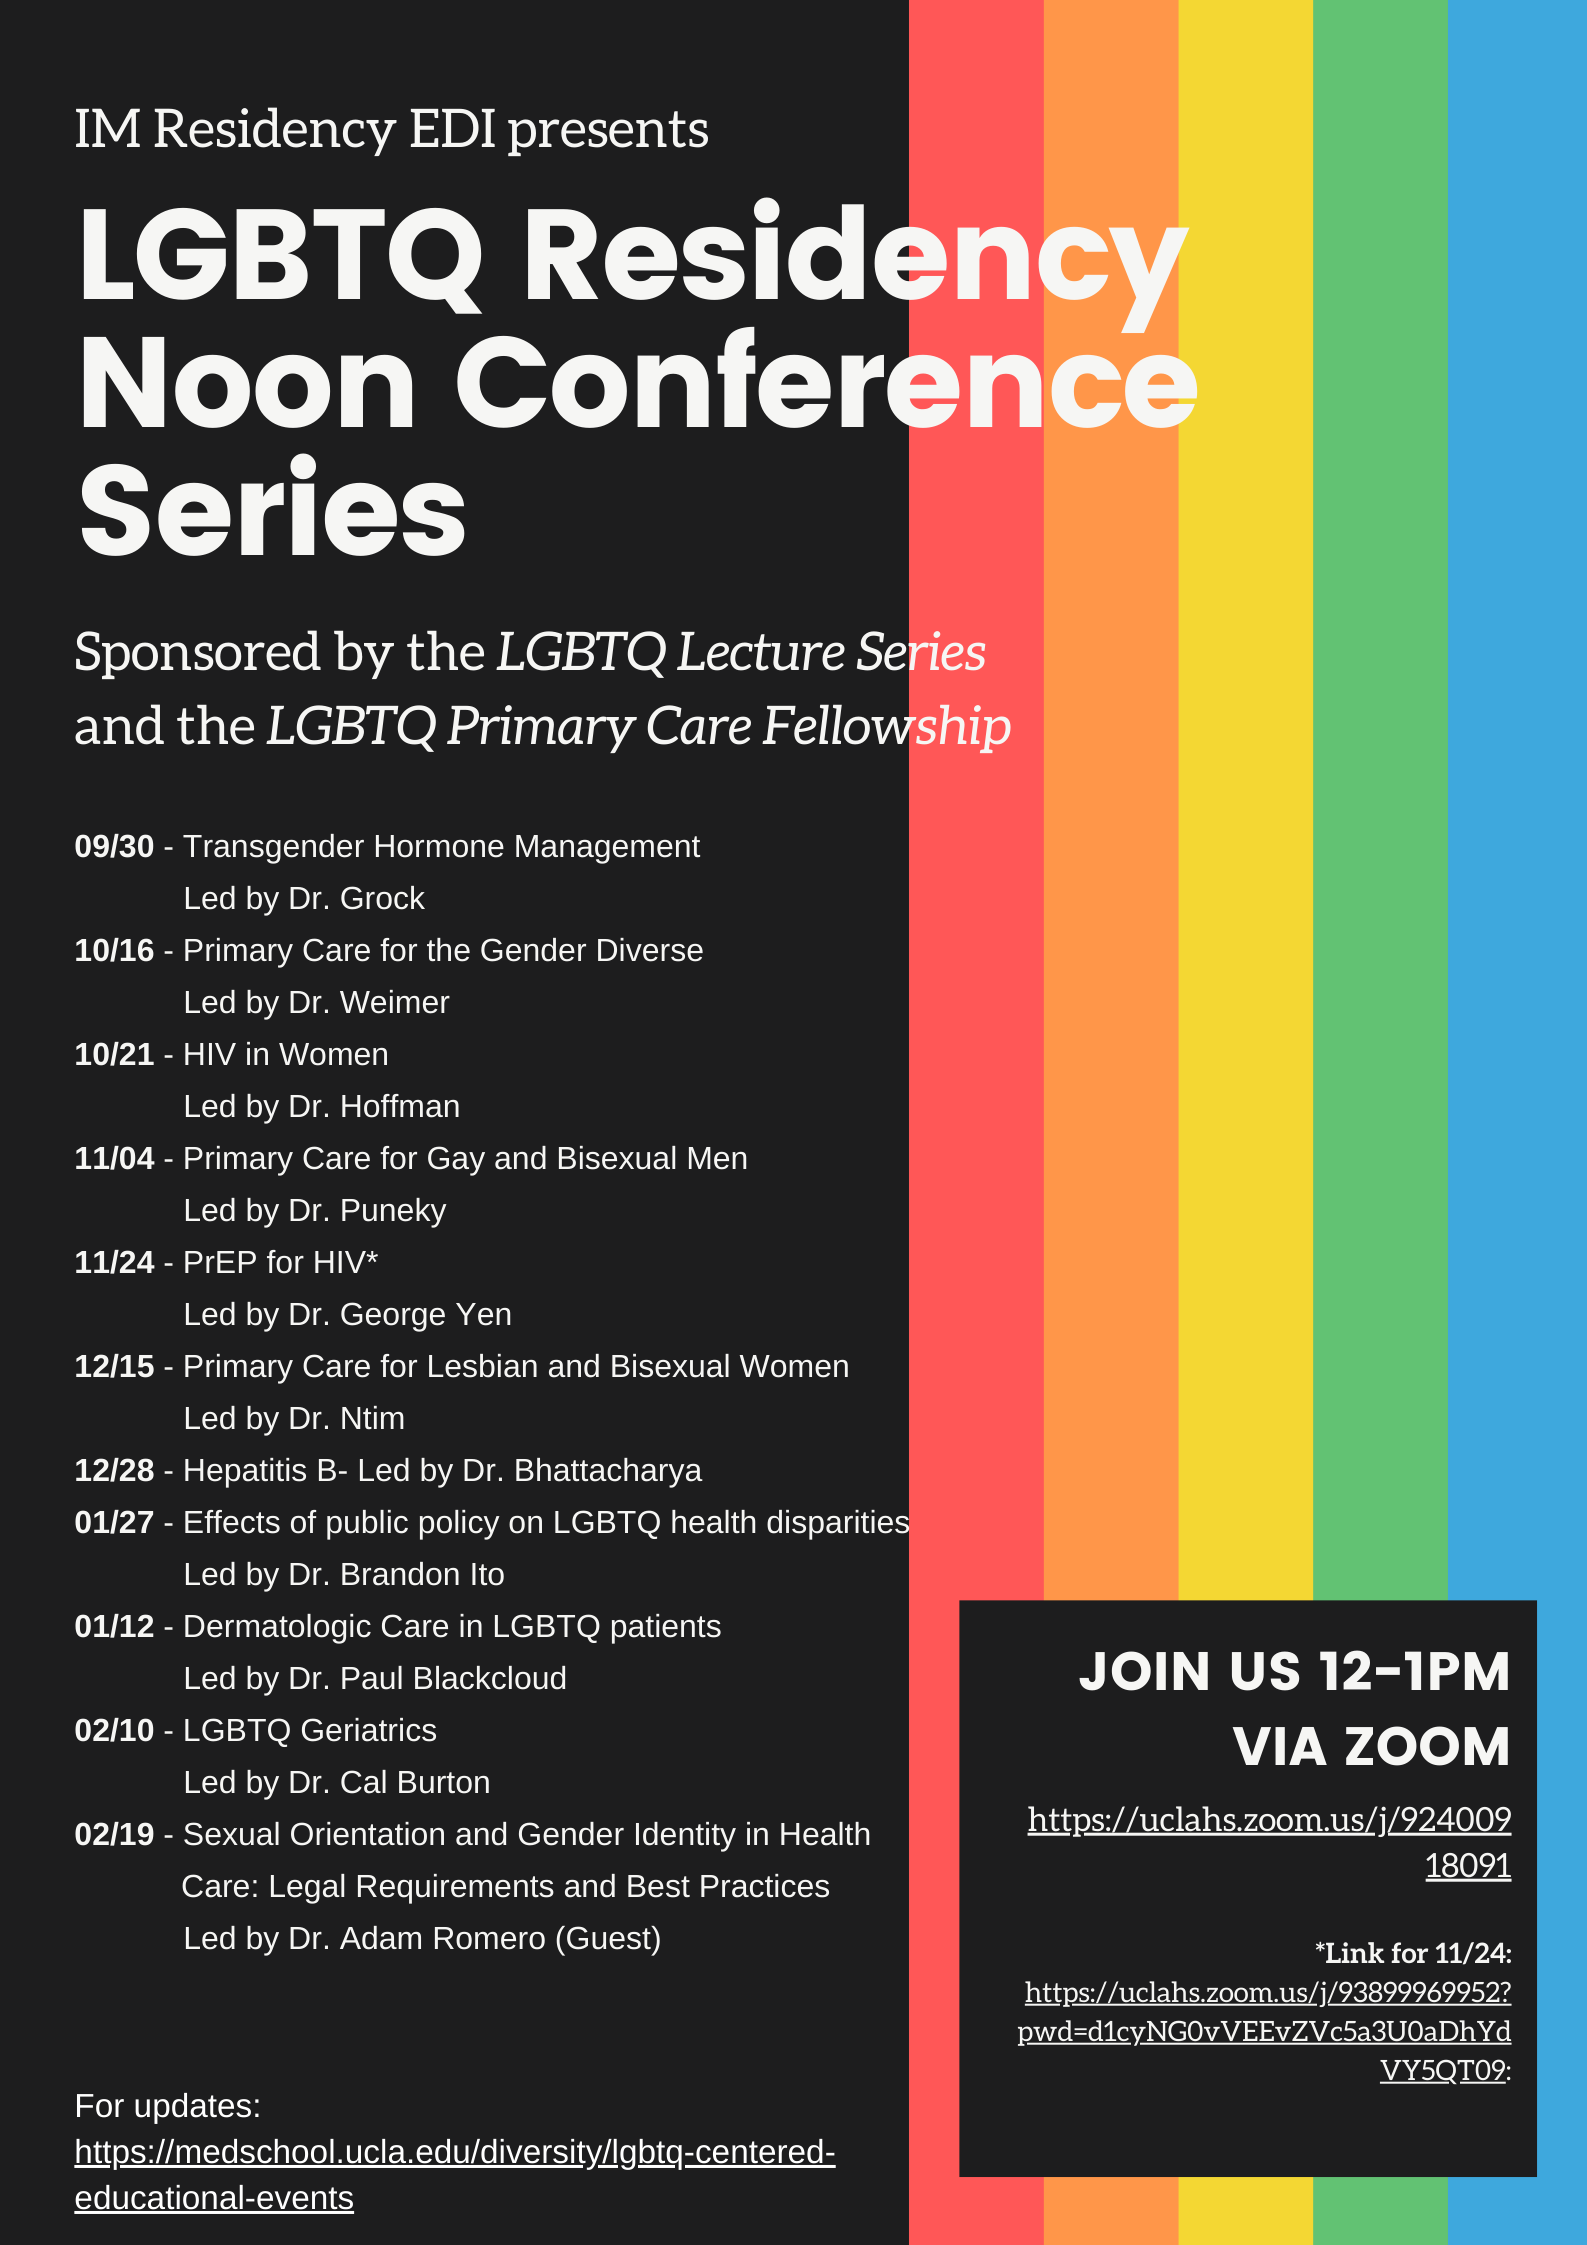 LGBTQ Residency Noon Conference Series